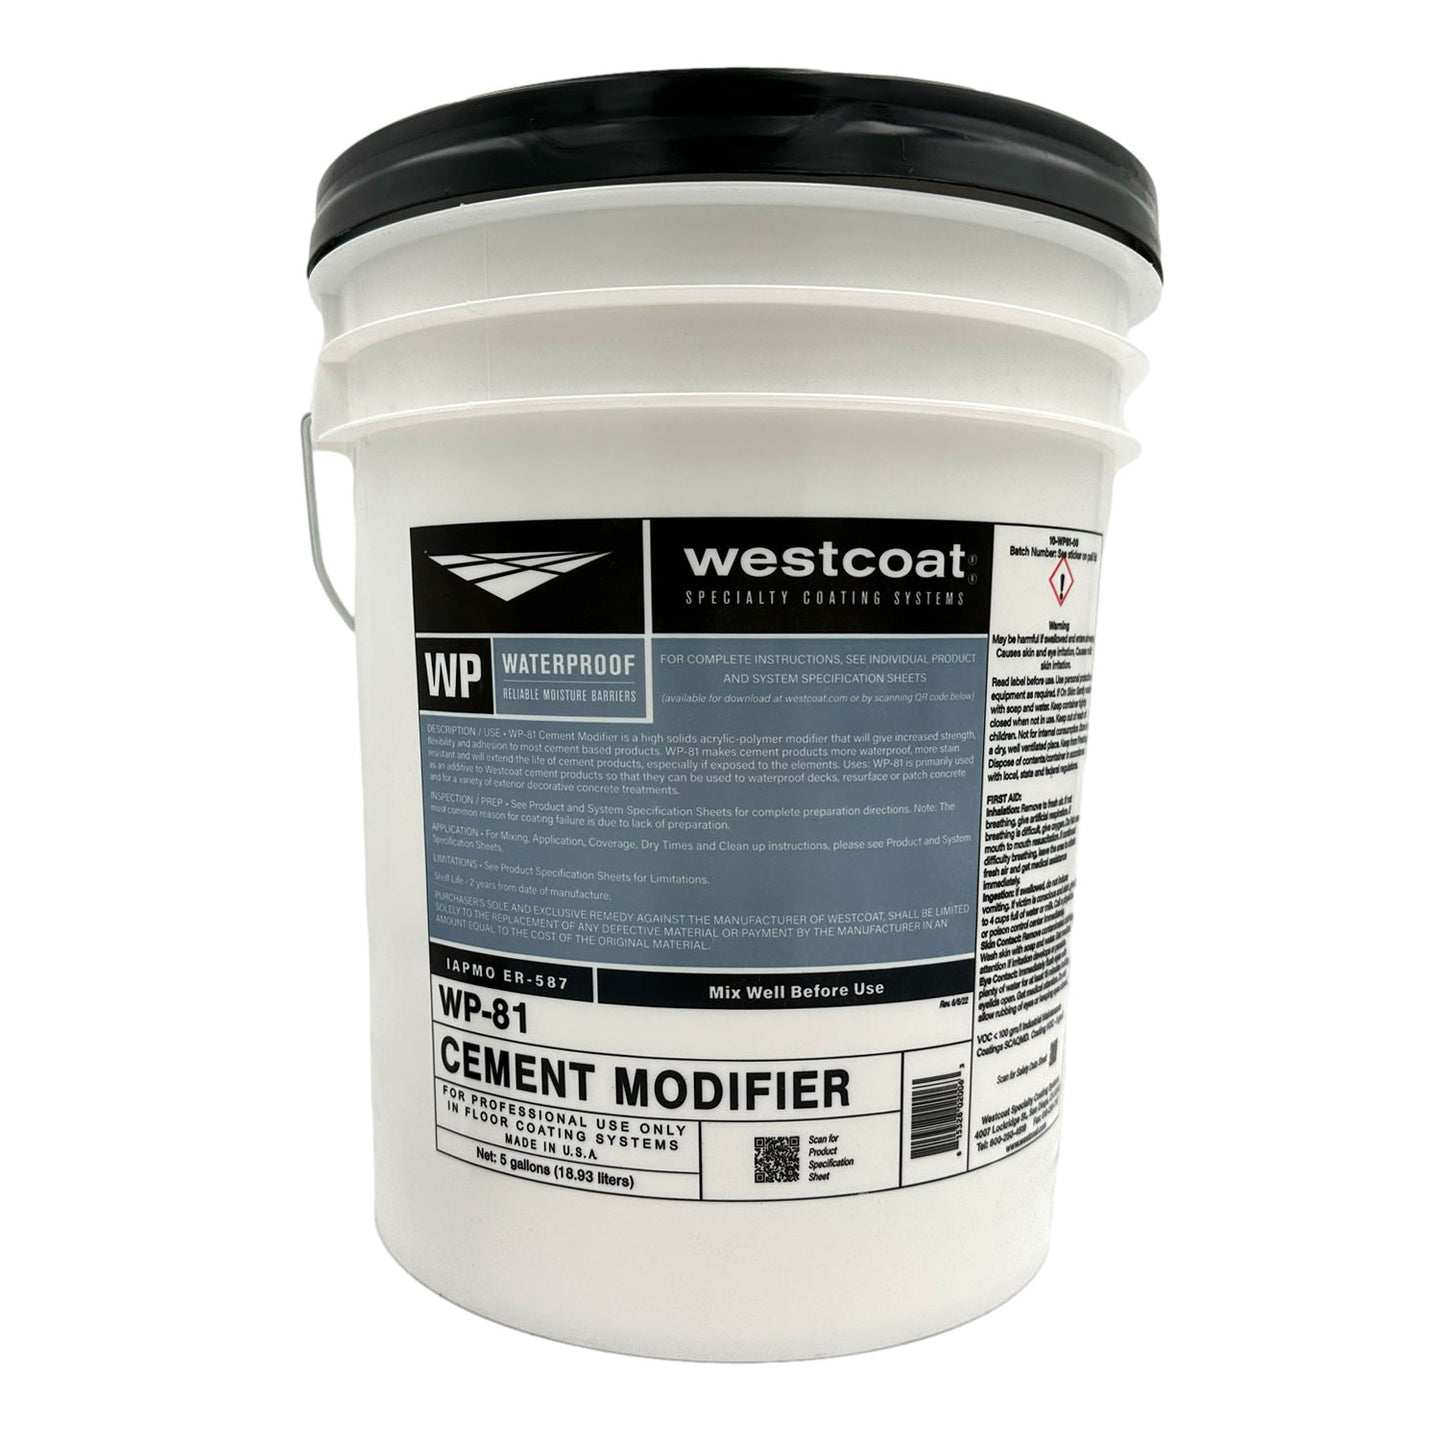 Smooth Texture Weather Resistant High-strength White Cement Based